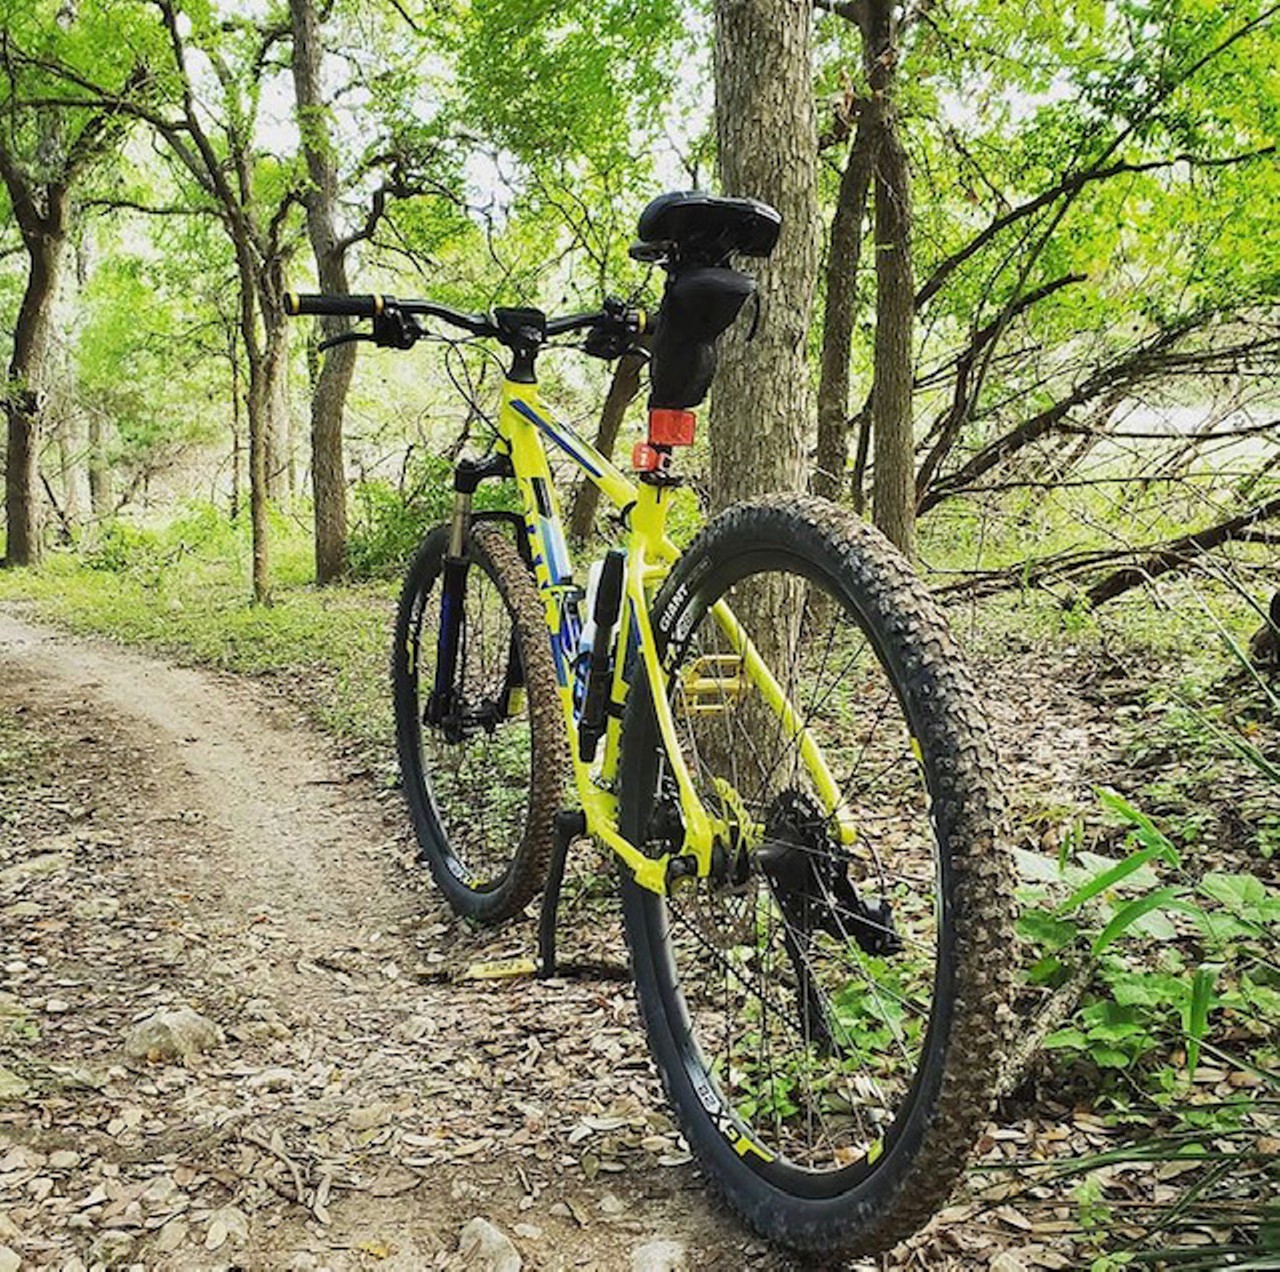 Go mountain biking at O.P. Schnabel9606 Bandera Rd., (210) 207-7275, sanantonio.gov With 10 miles of mountain bike trails, including six easy rated trails, three intermediate and one difficult, it’s no wonder mountain bikers of all levels flock to O.P. Schnabel Park. Smooth trails in the upper part of the park are suitable for beginners while a single-track trail following the dry creek bed offers drops and downhill areas for those who like to free-ride. The Monkey Loop is the most difficult, with up to 3-foot jumps and 4-foot drops.             Photo via Instagram / big_shred_e